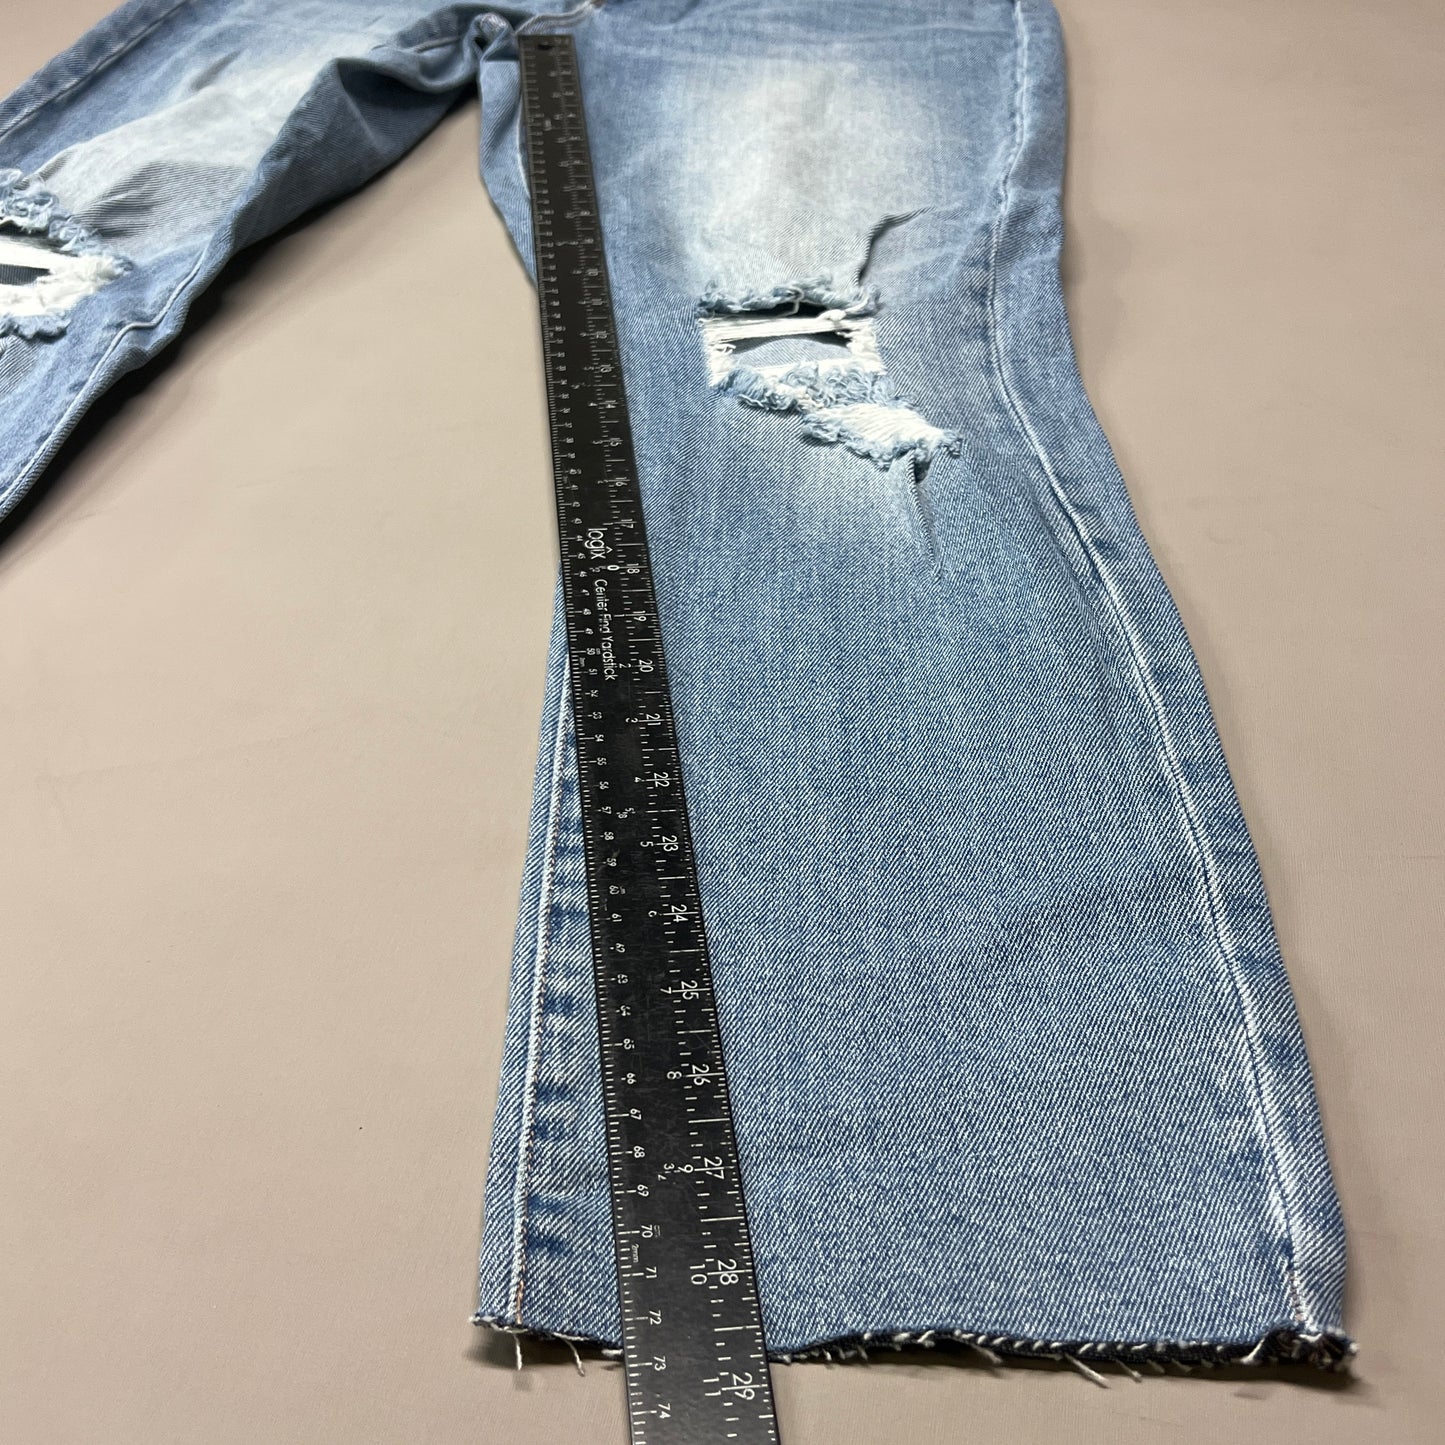 ARTICLES OF SOCIETY Orchidland Ripped Denim Jeans Women's Sz 30 Blue 4009TQ3-717 (New)